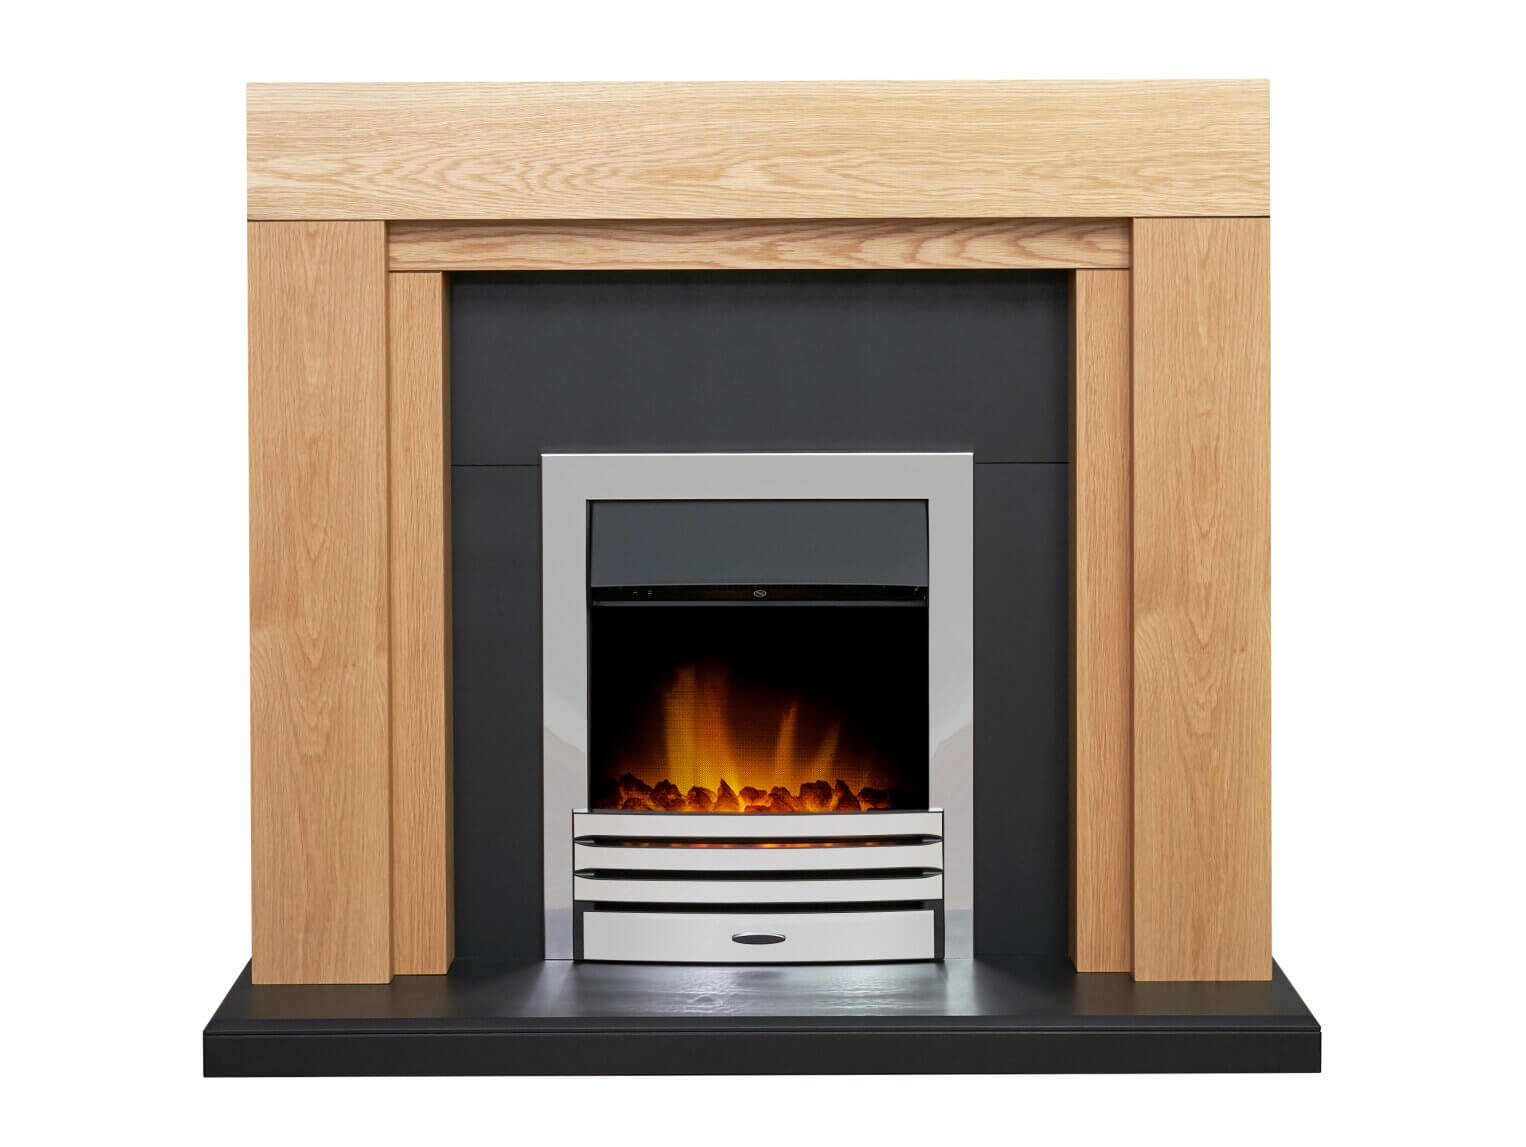 Adam Beaumont Oak & Black Fireplace with Downlights & Eclipse Electric Fire in Chrome - Glowing Flames